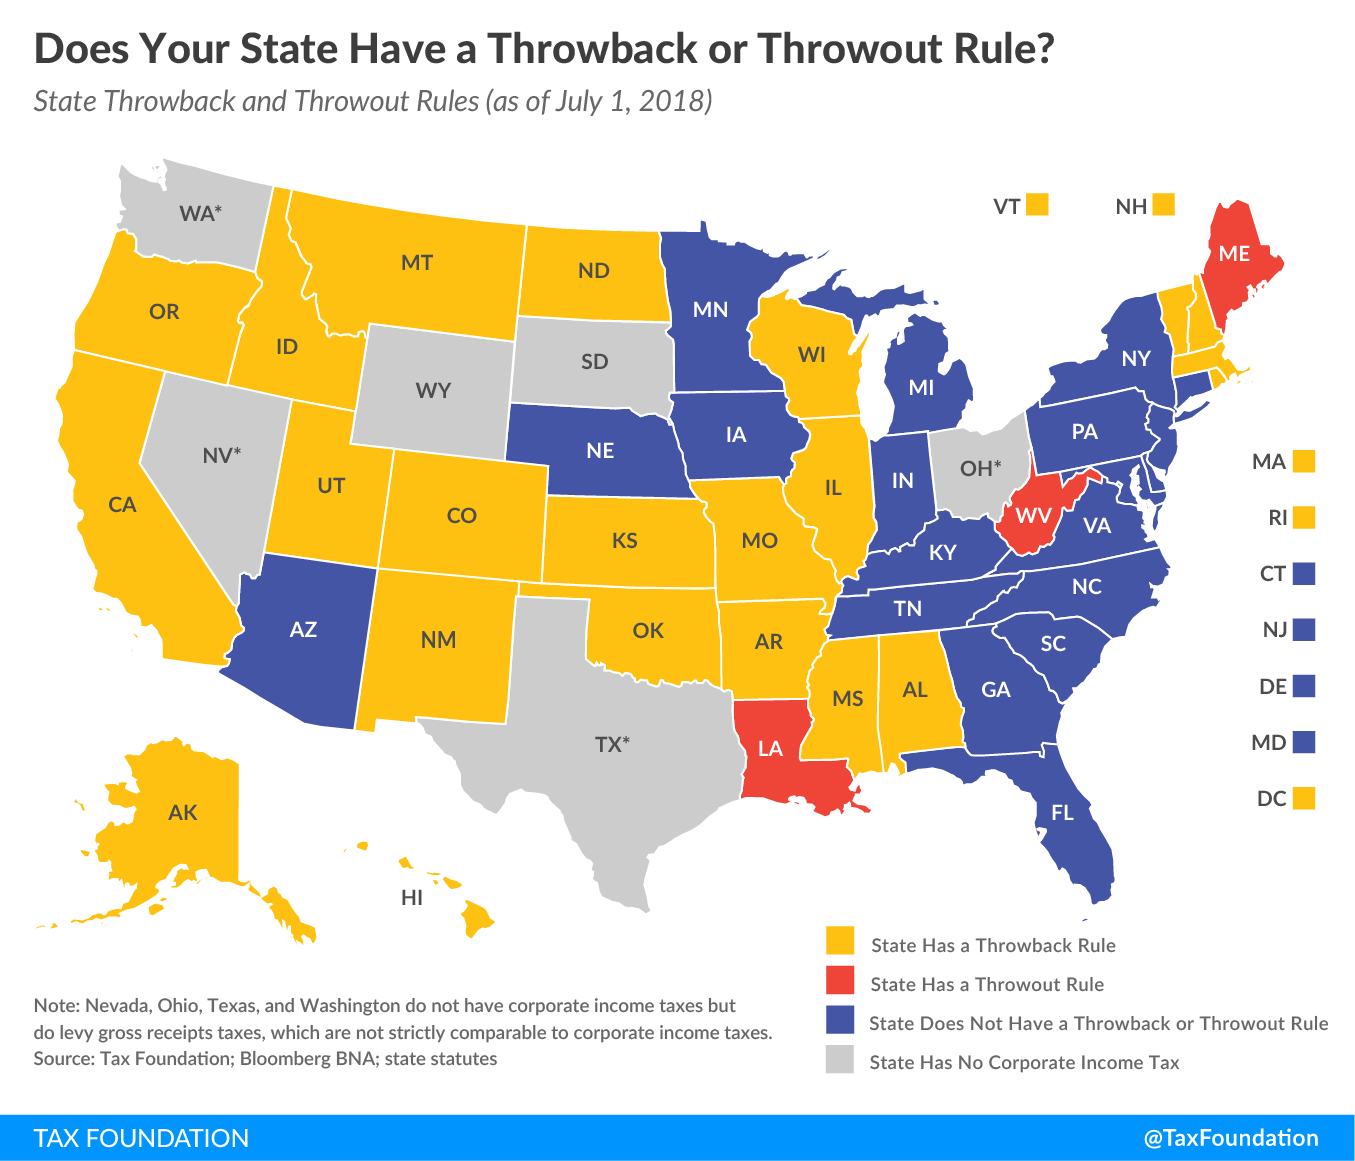 Does Your State Have a Throwback or Throwout Rule?